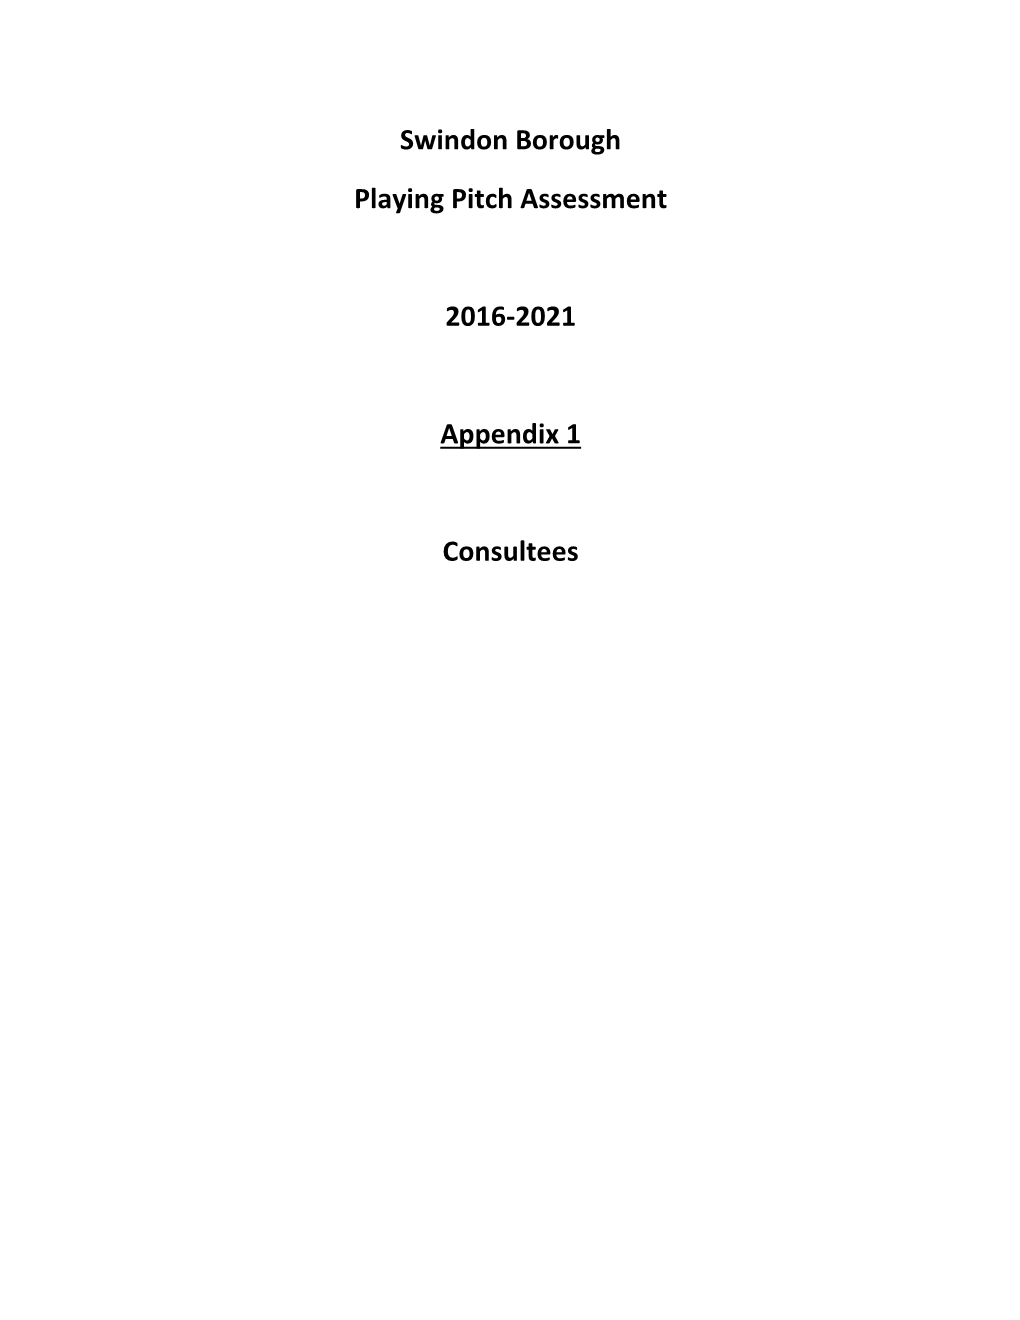 Swindon Playing Pitch Strategy Assessment Report